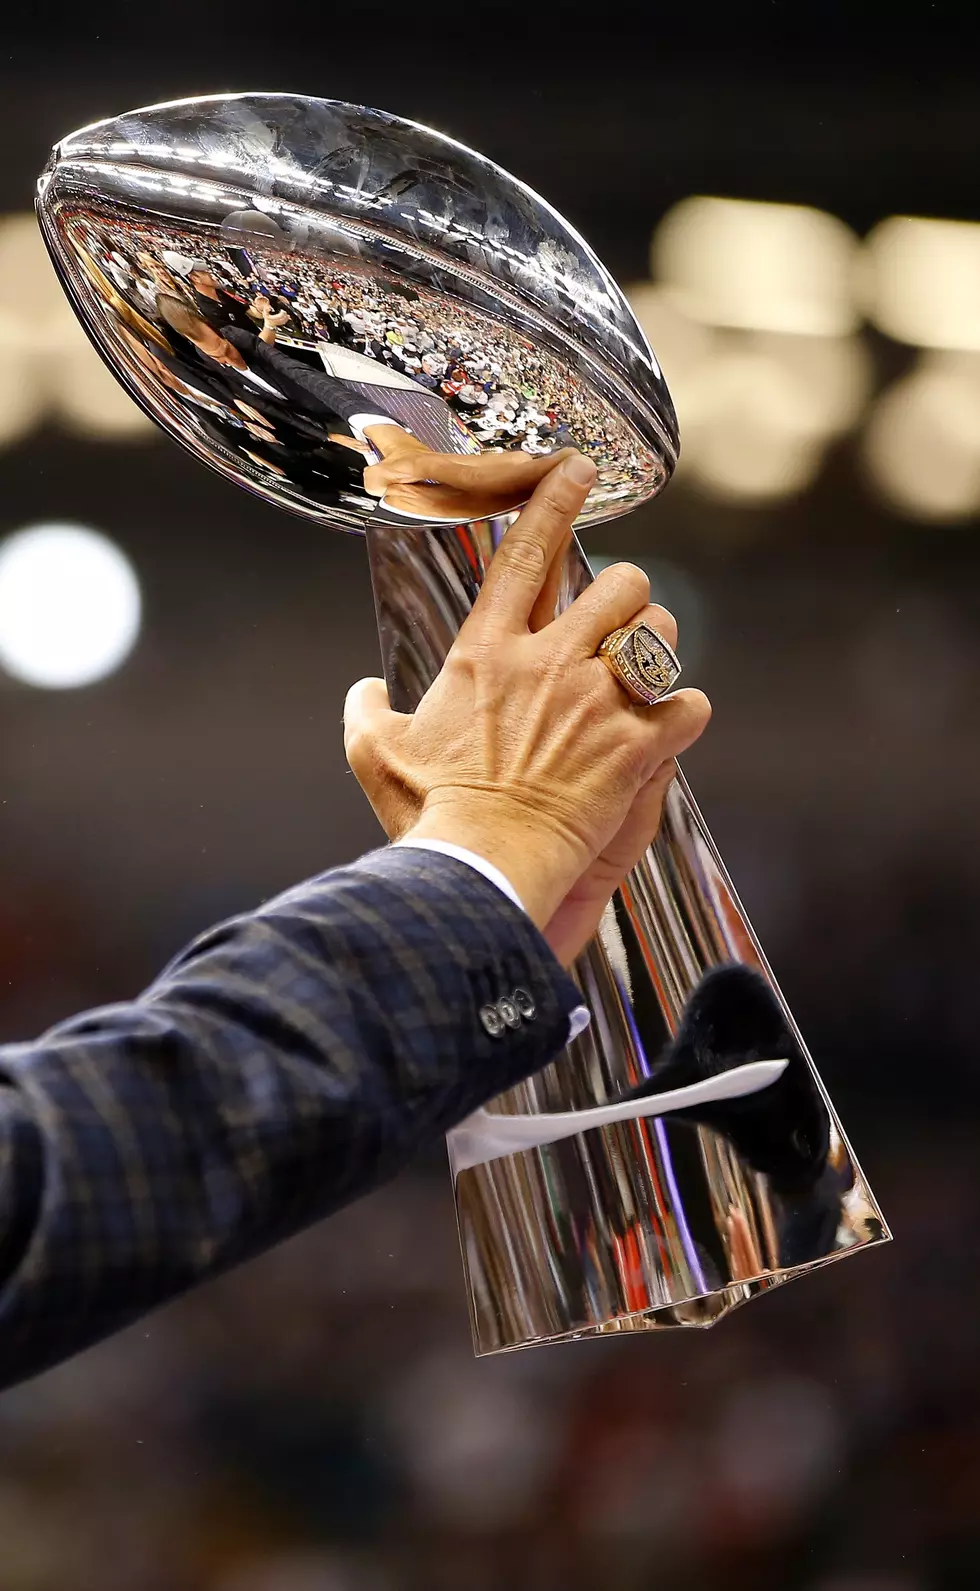 Here Are The Stangest Penalities and Plays That Could Actually Happen During The Super Bowl